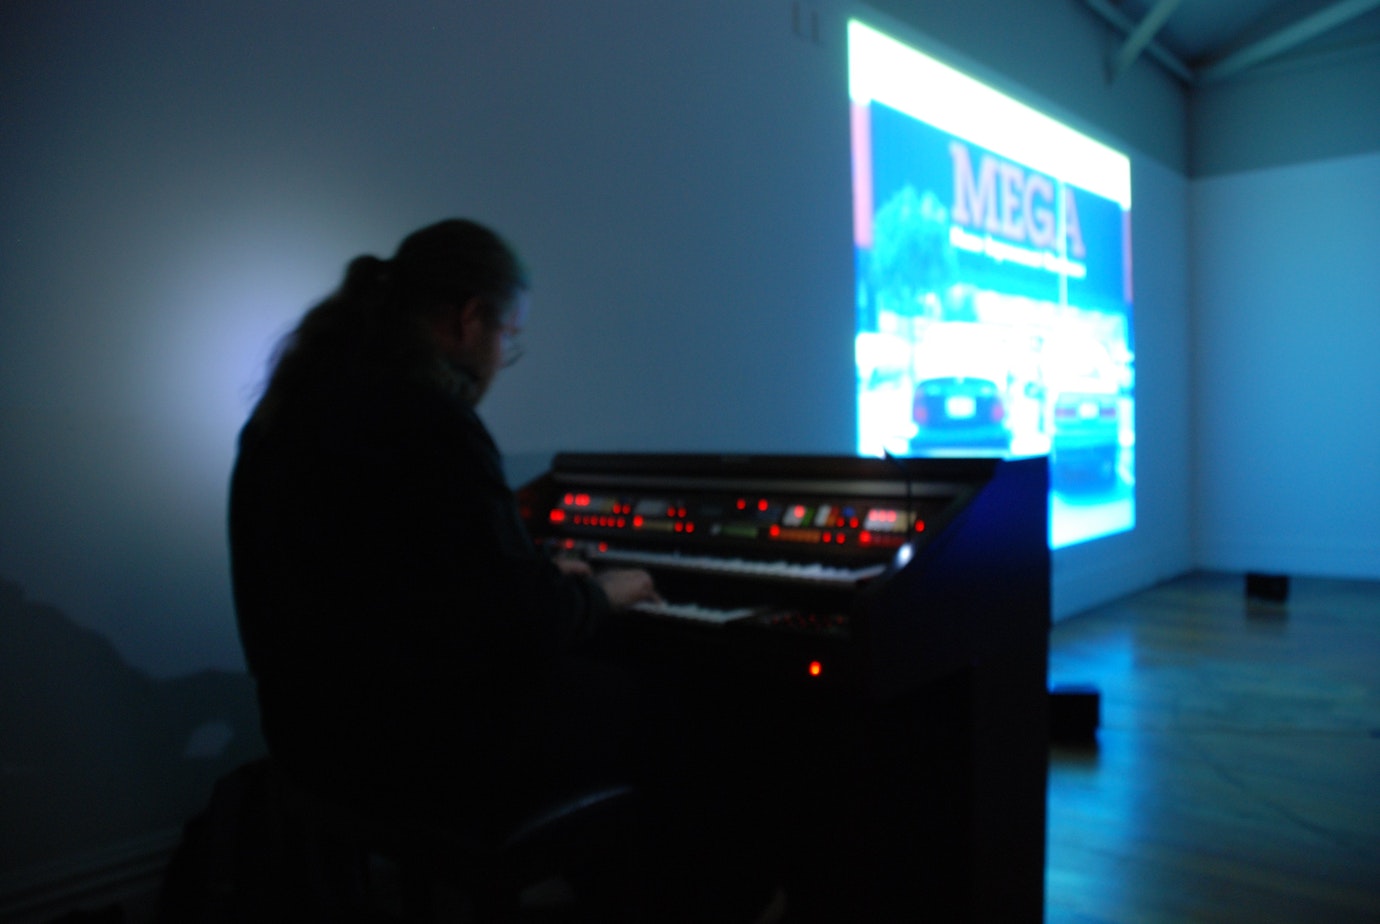 In the dark of a gallery a person plays a keyboard organ to accompany a projected image of a Mitre 10 mega store